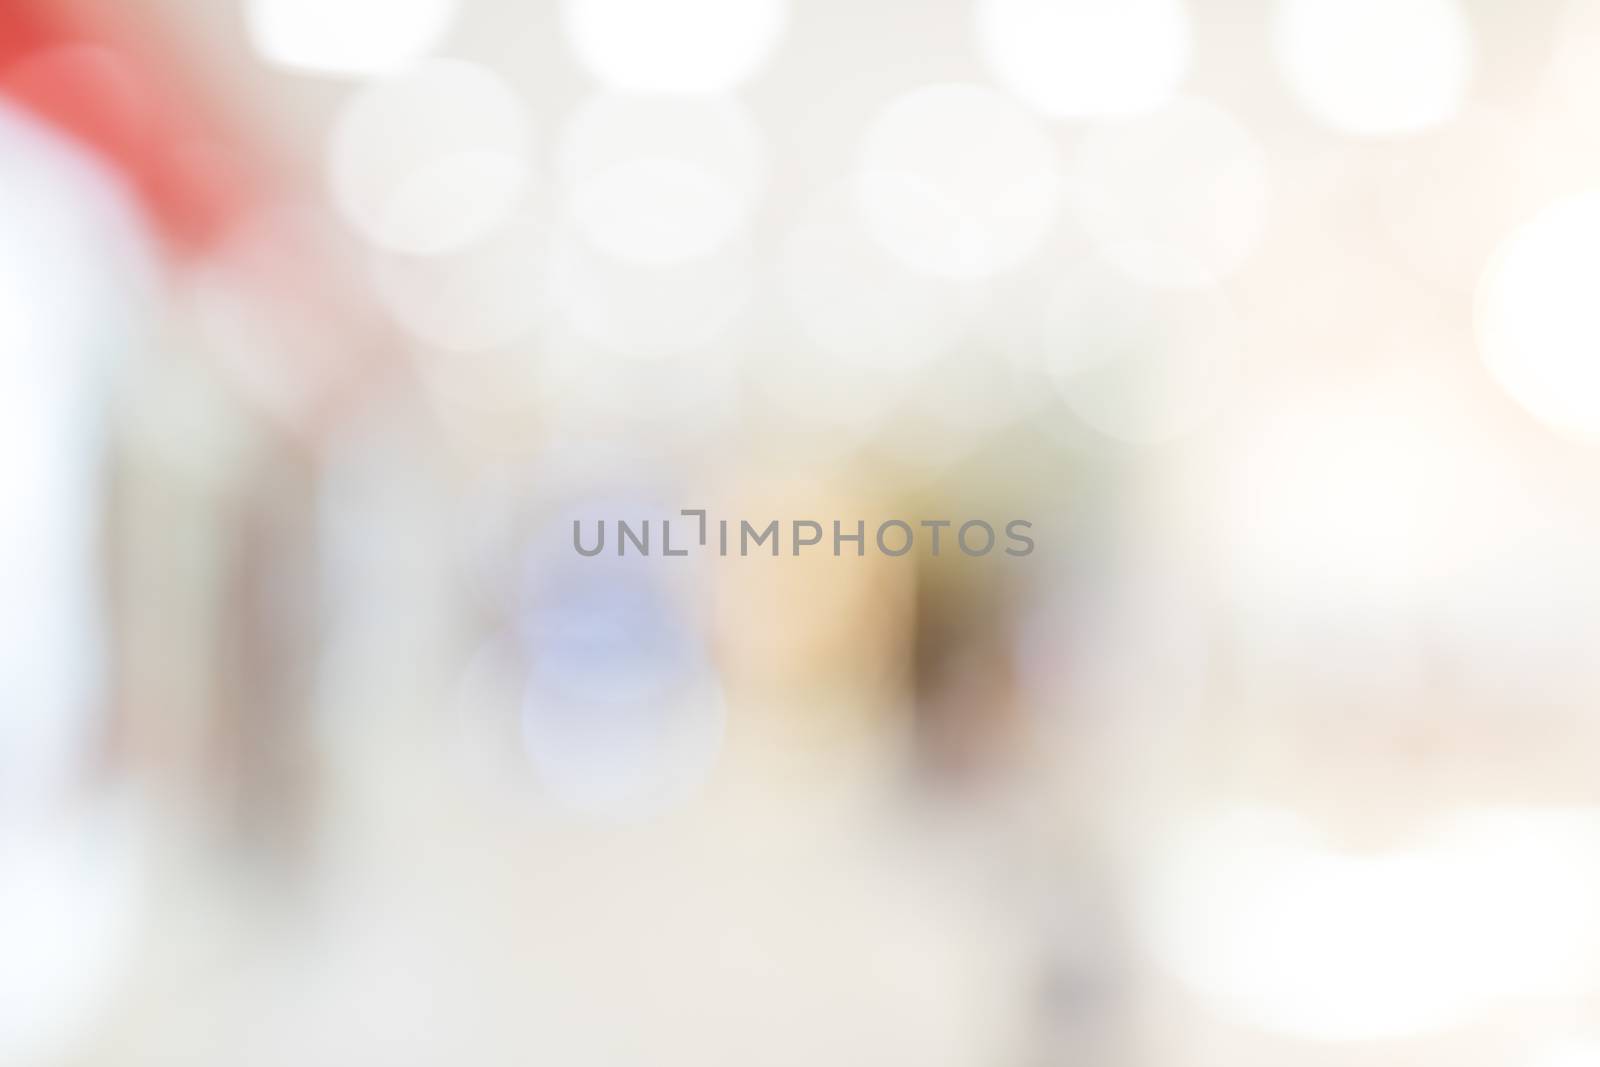 Blur store with bokeh background, business background